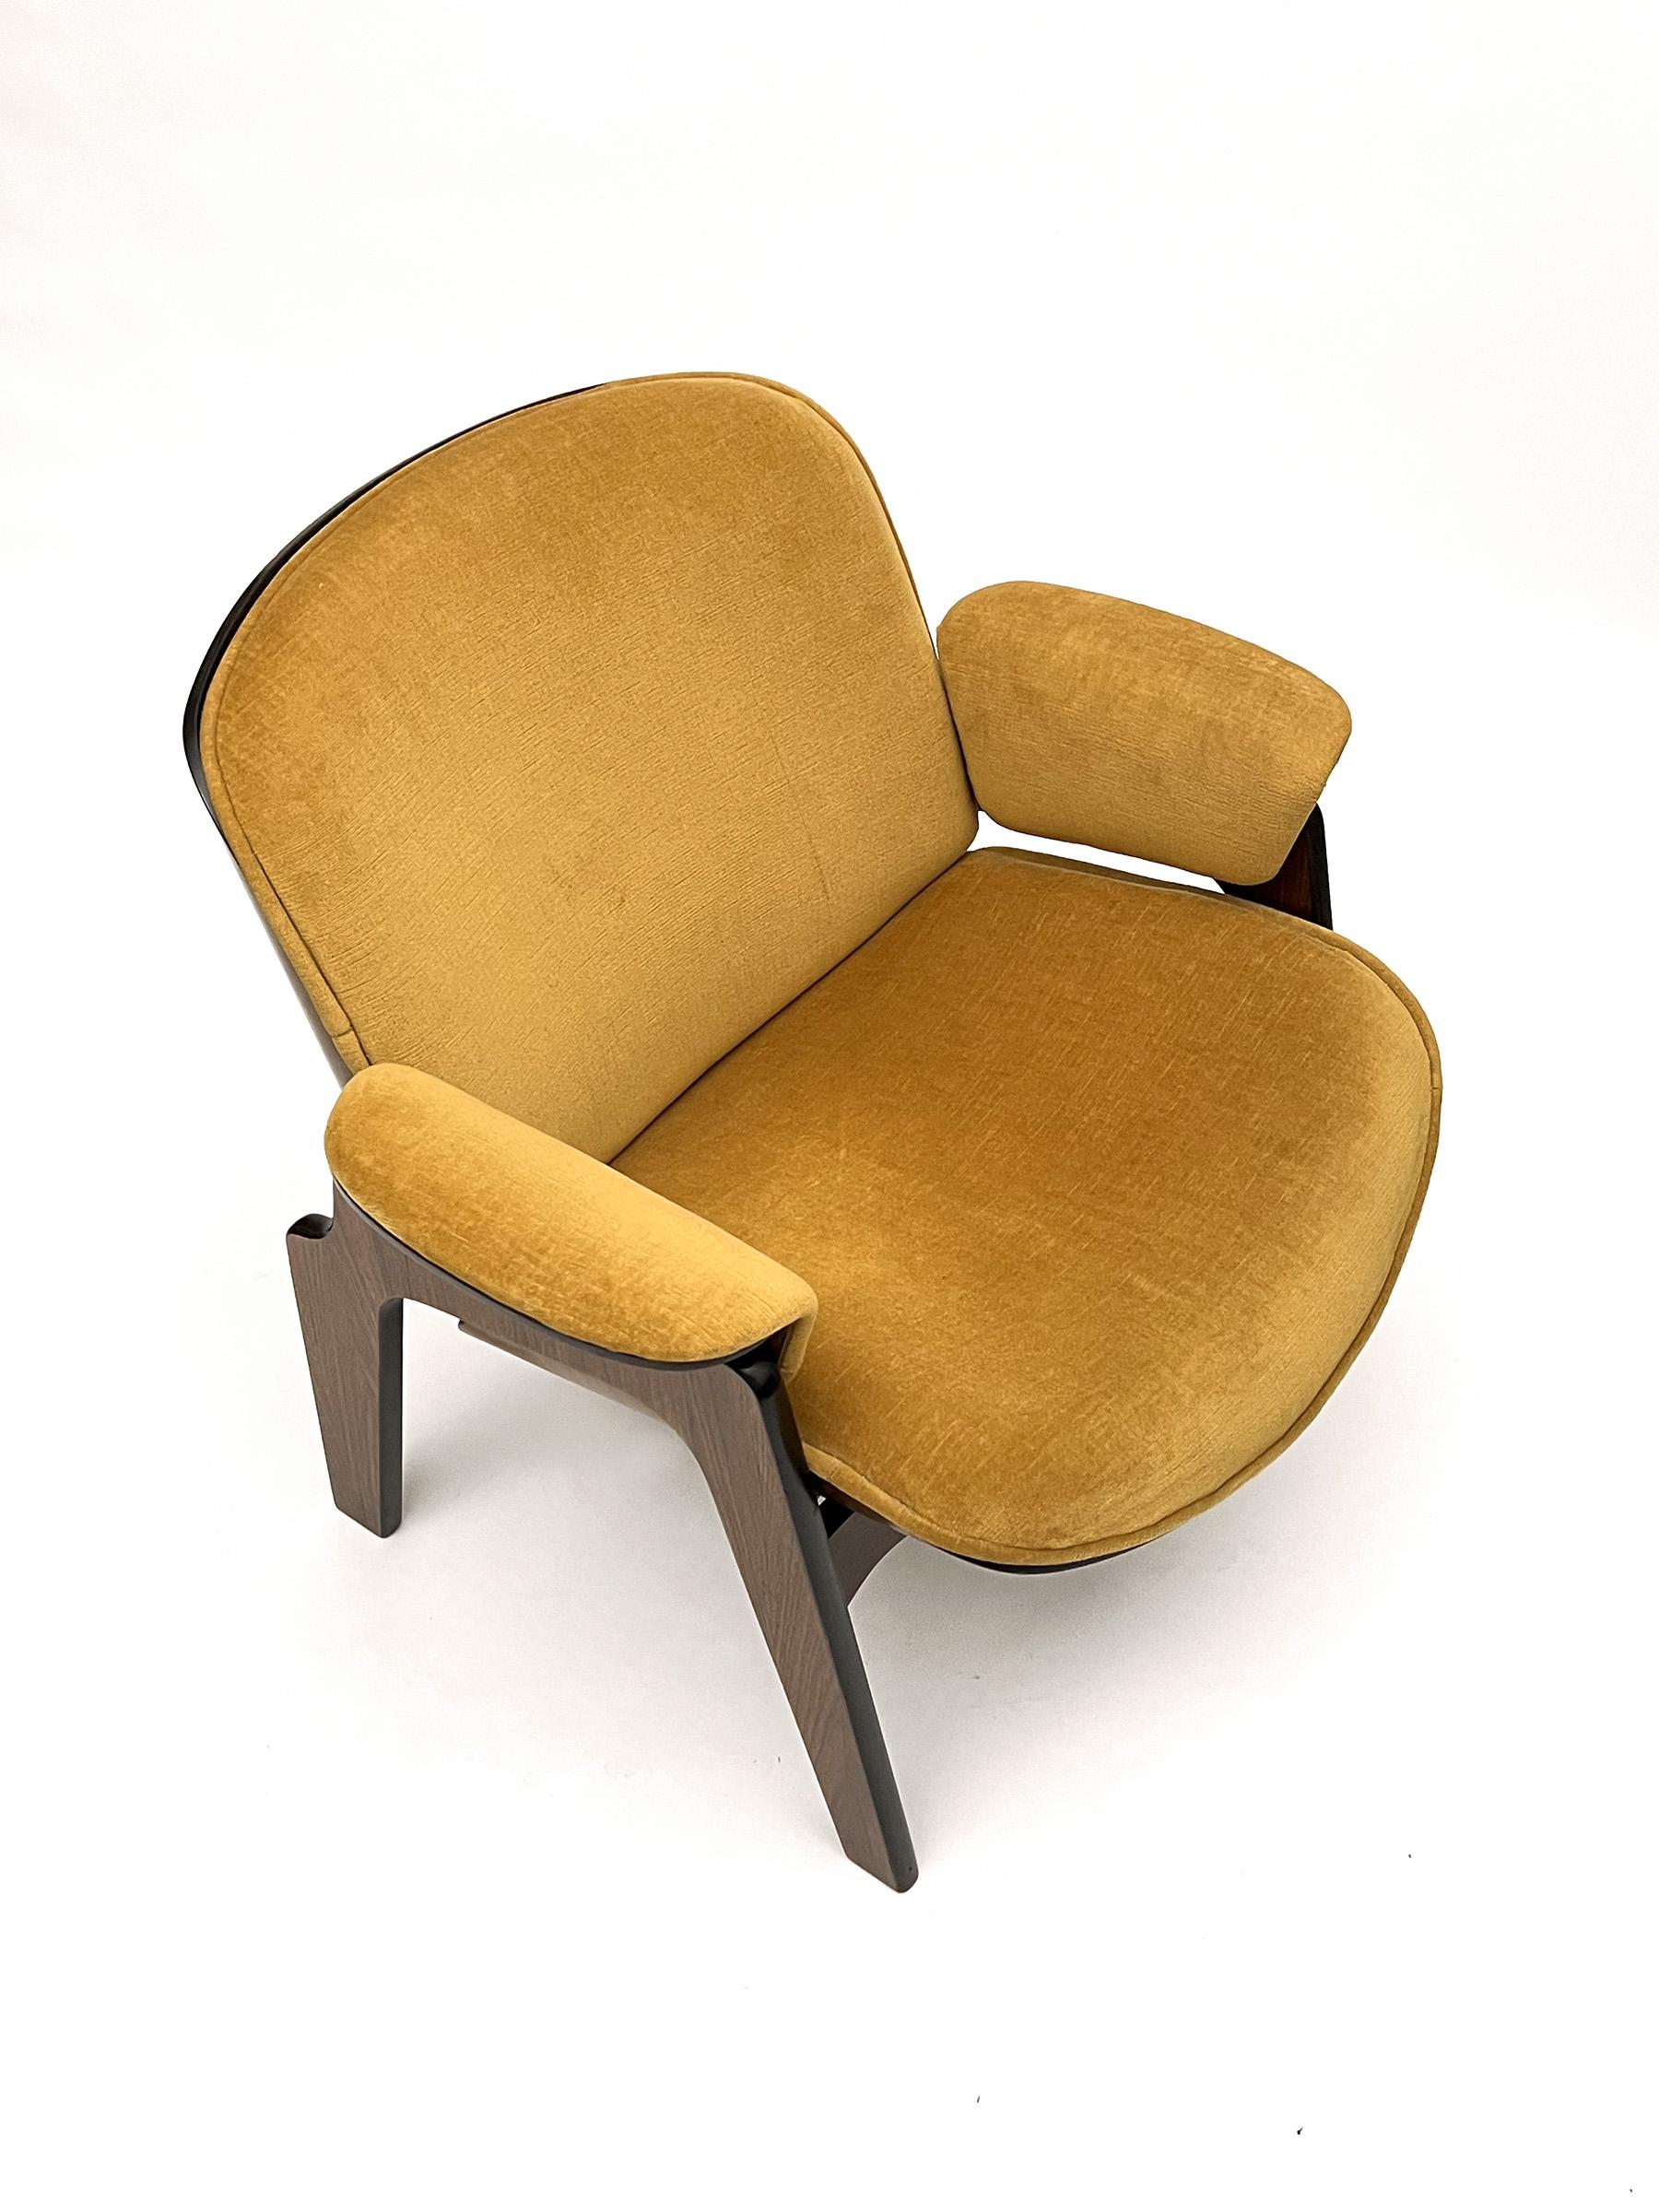 A 1960s armchair designed by Ico Parisi for MIM Roma, made of curved plywood and velvet.
The armchair is composed of two curved plywood shells with two shaped elements at the sides that form the armrests and legs.
MIM was one of the few furniture